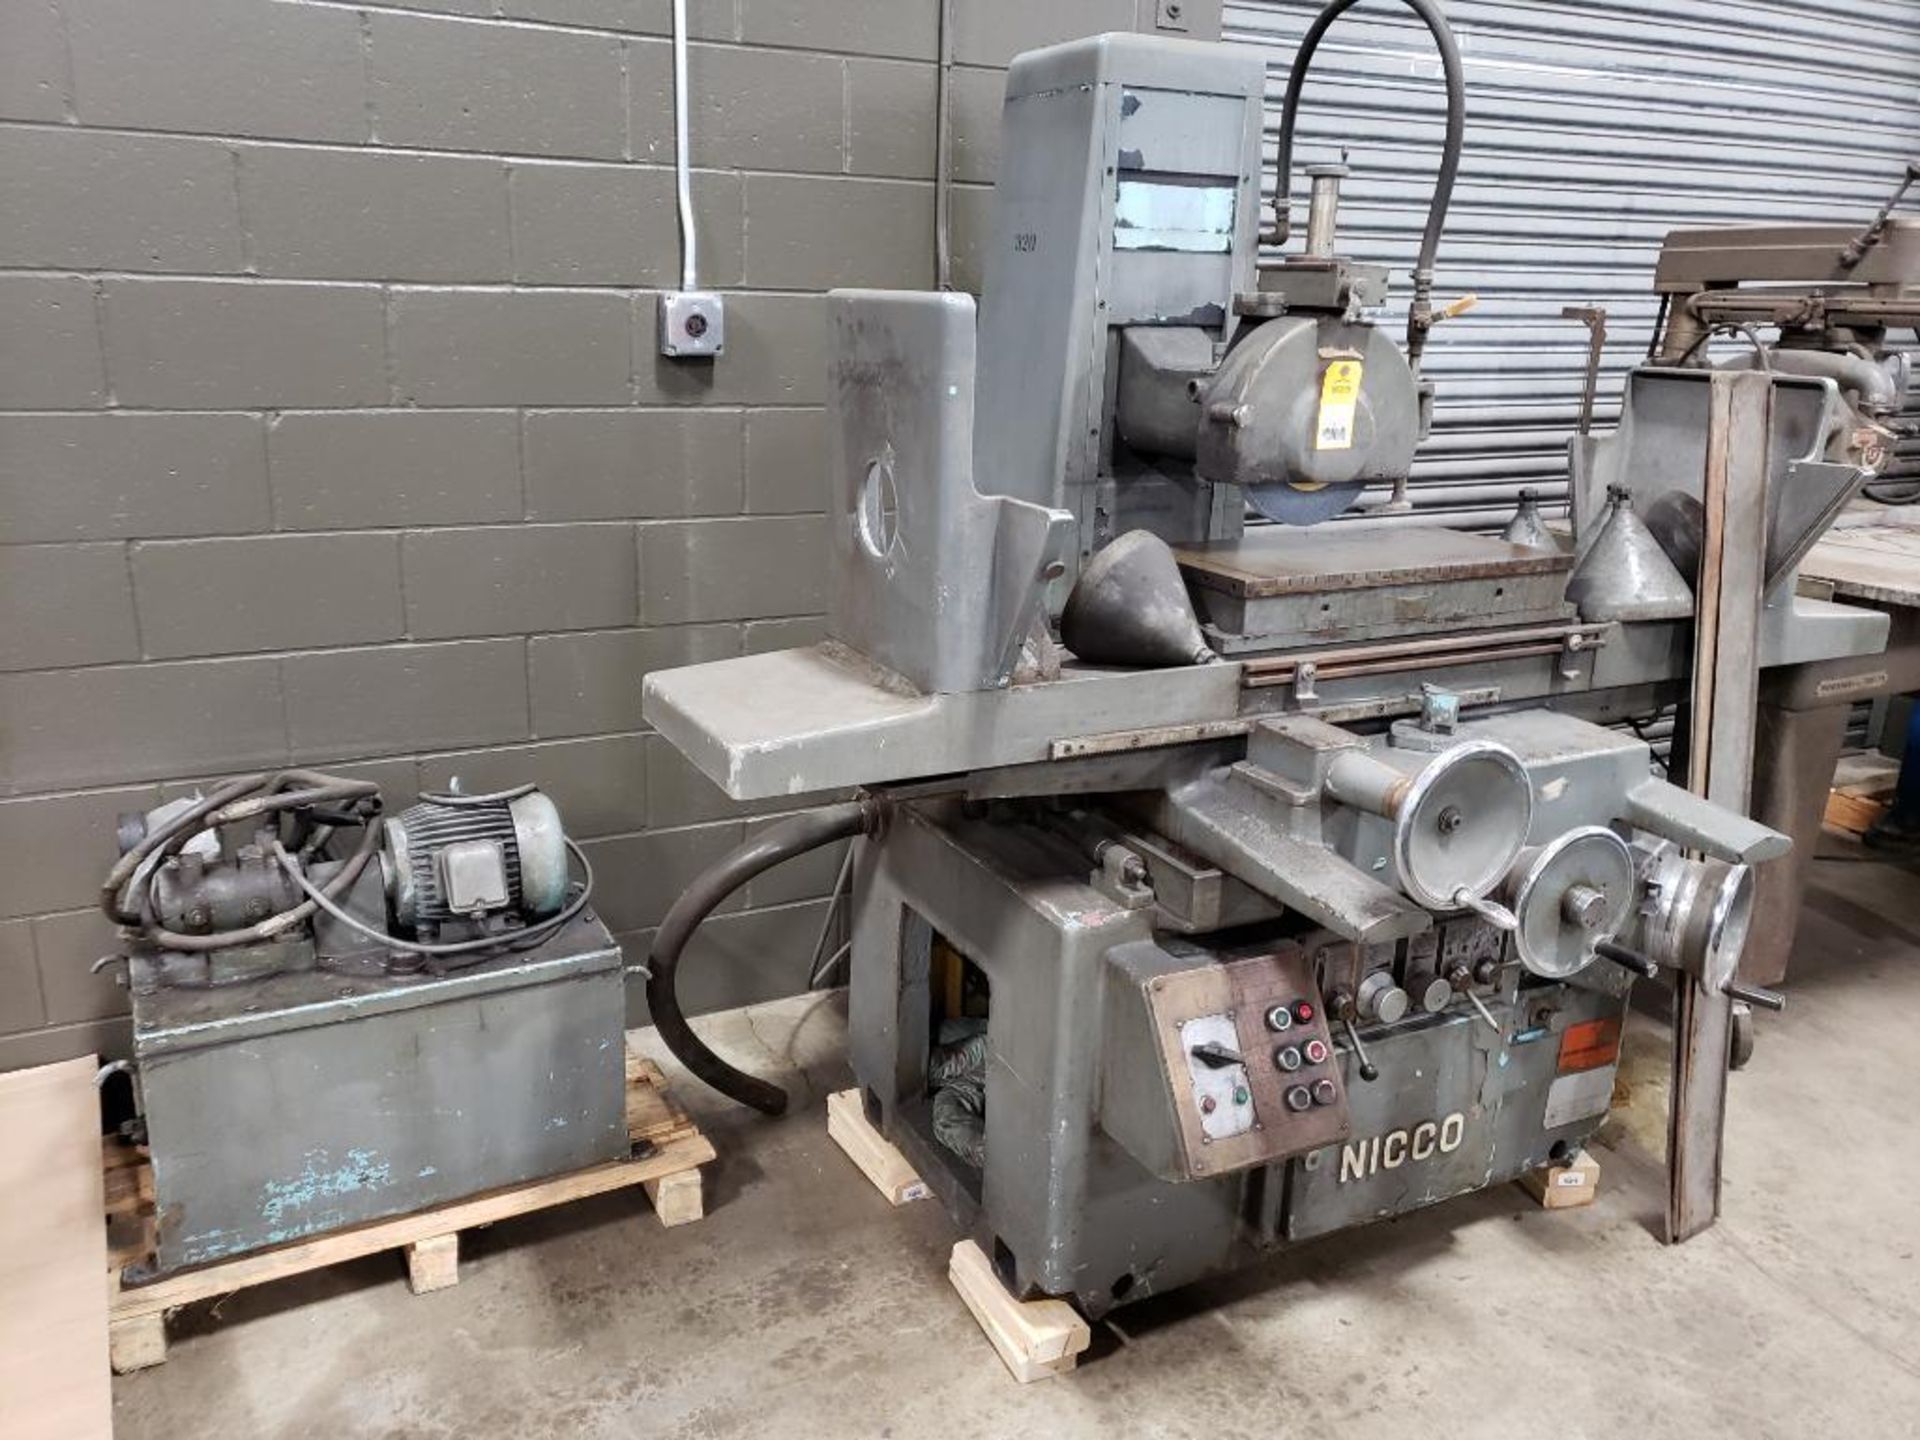 Nikko Hydraulic surface grinder. 11 1/2"x24" electomagnetic chuck.